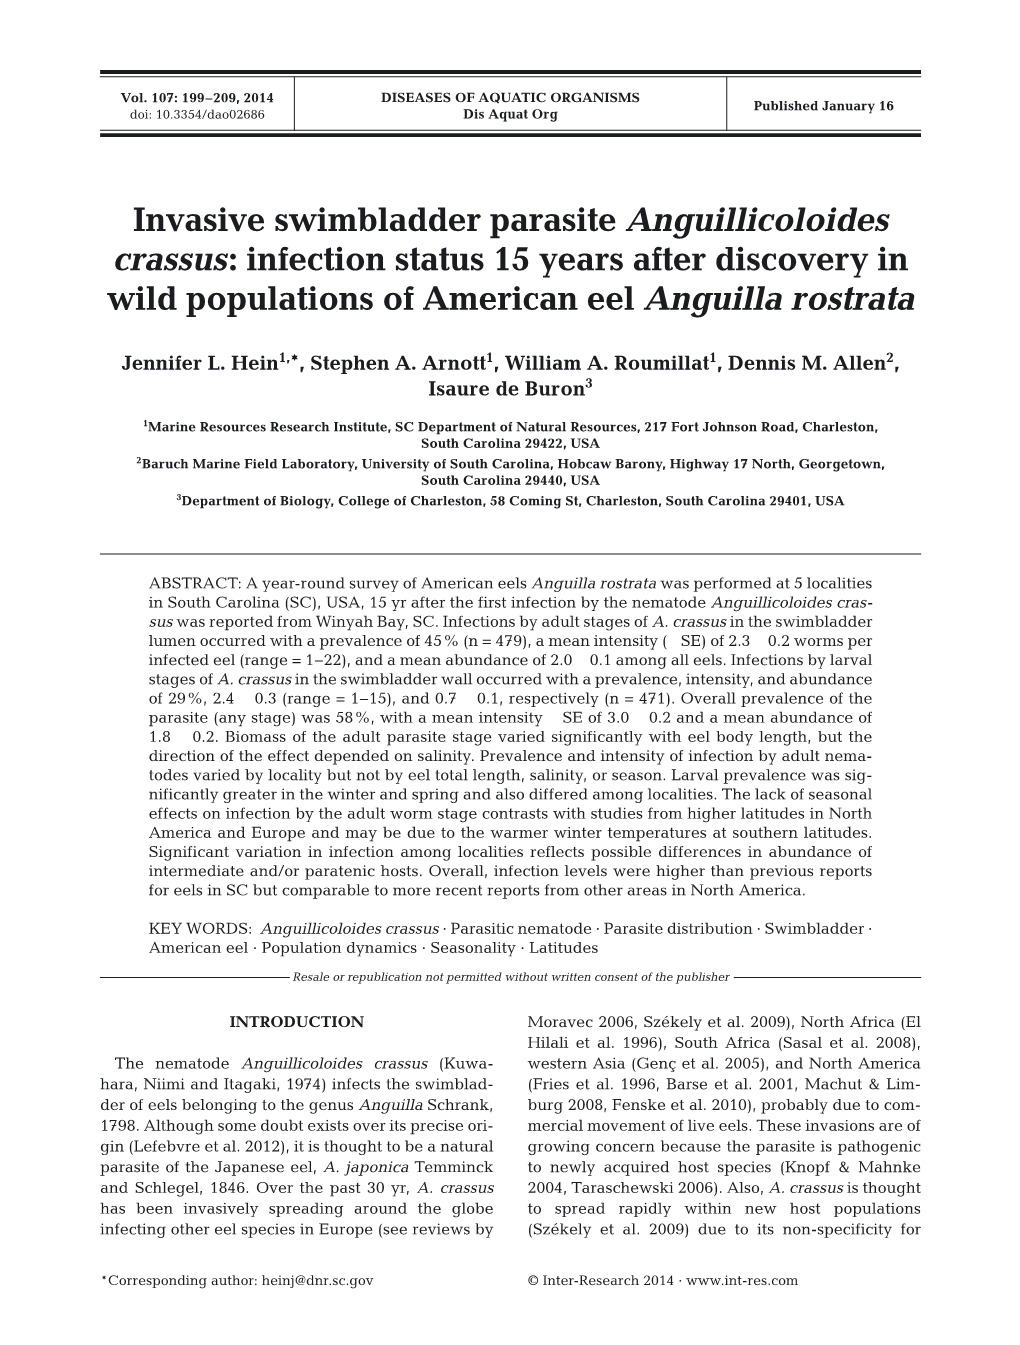 Invasive Swimbladder Parasite Anguillicoloides Crassus: Infection Status 15 Years After Discovery in Wild Populations of American Eel Anguilla Rostrata